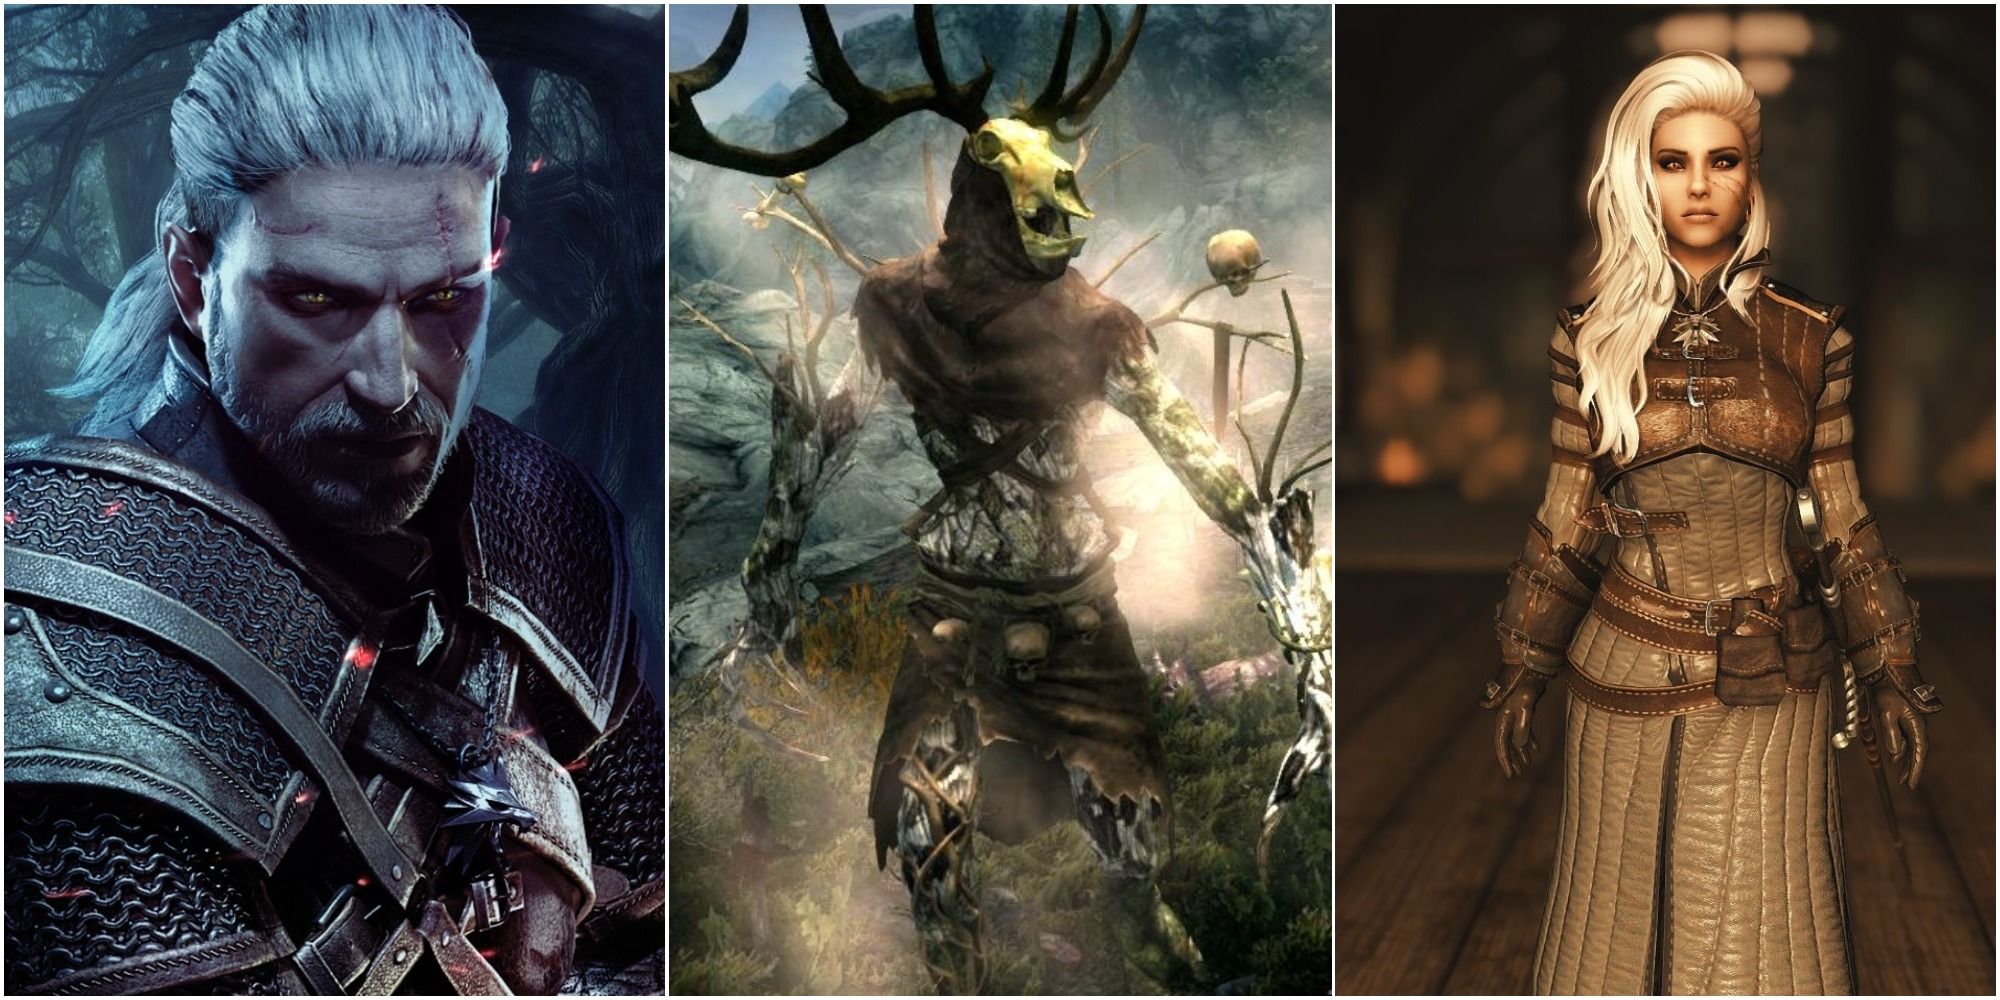 Geralt, Leshen and the player's character in Ursine Armor in Skyrim